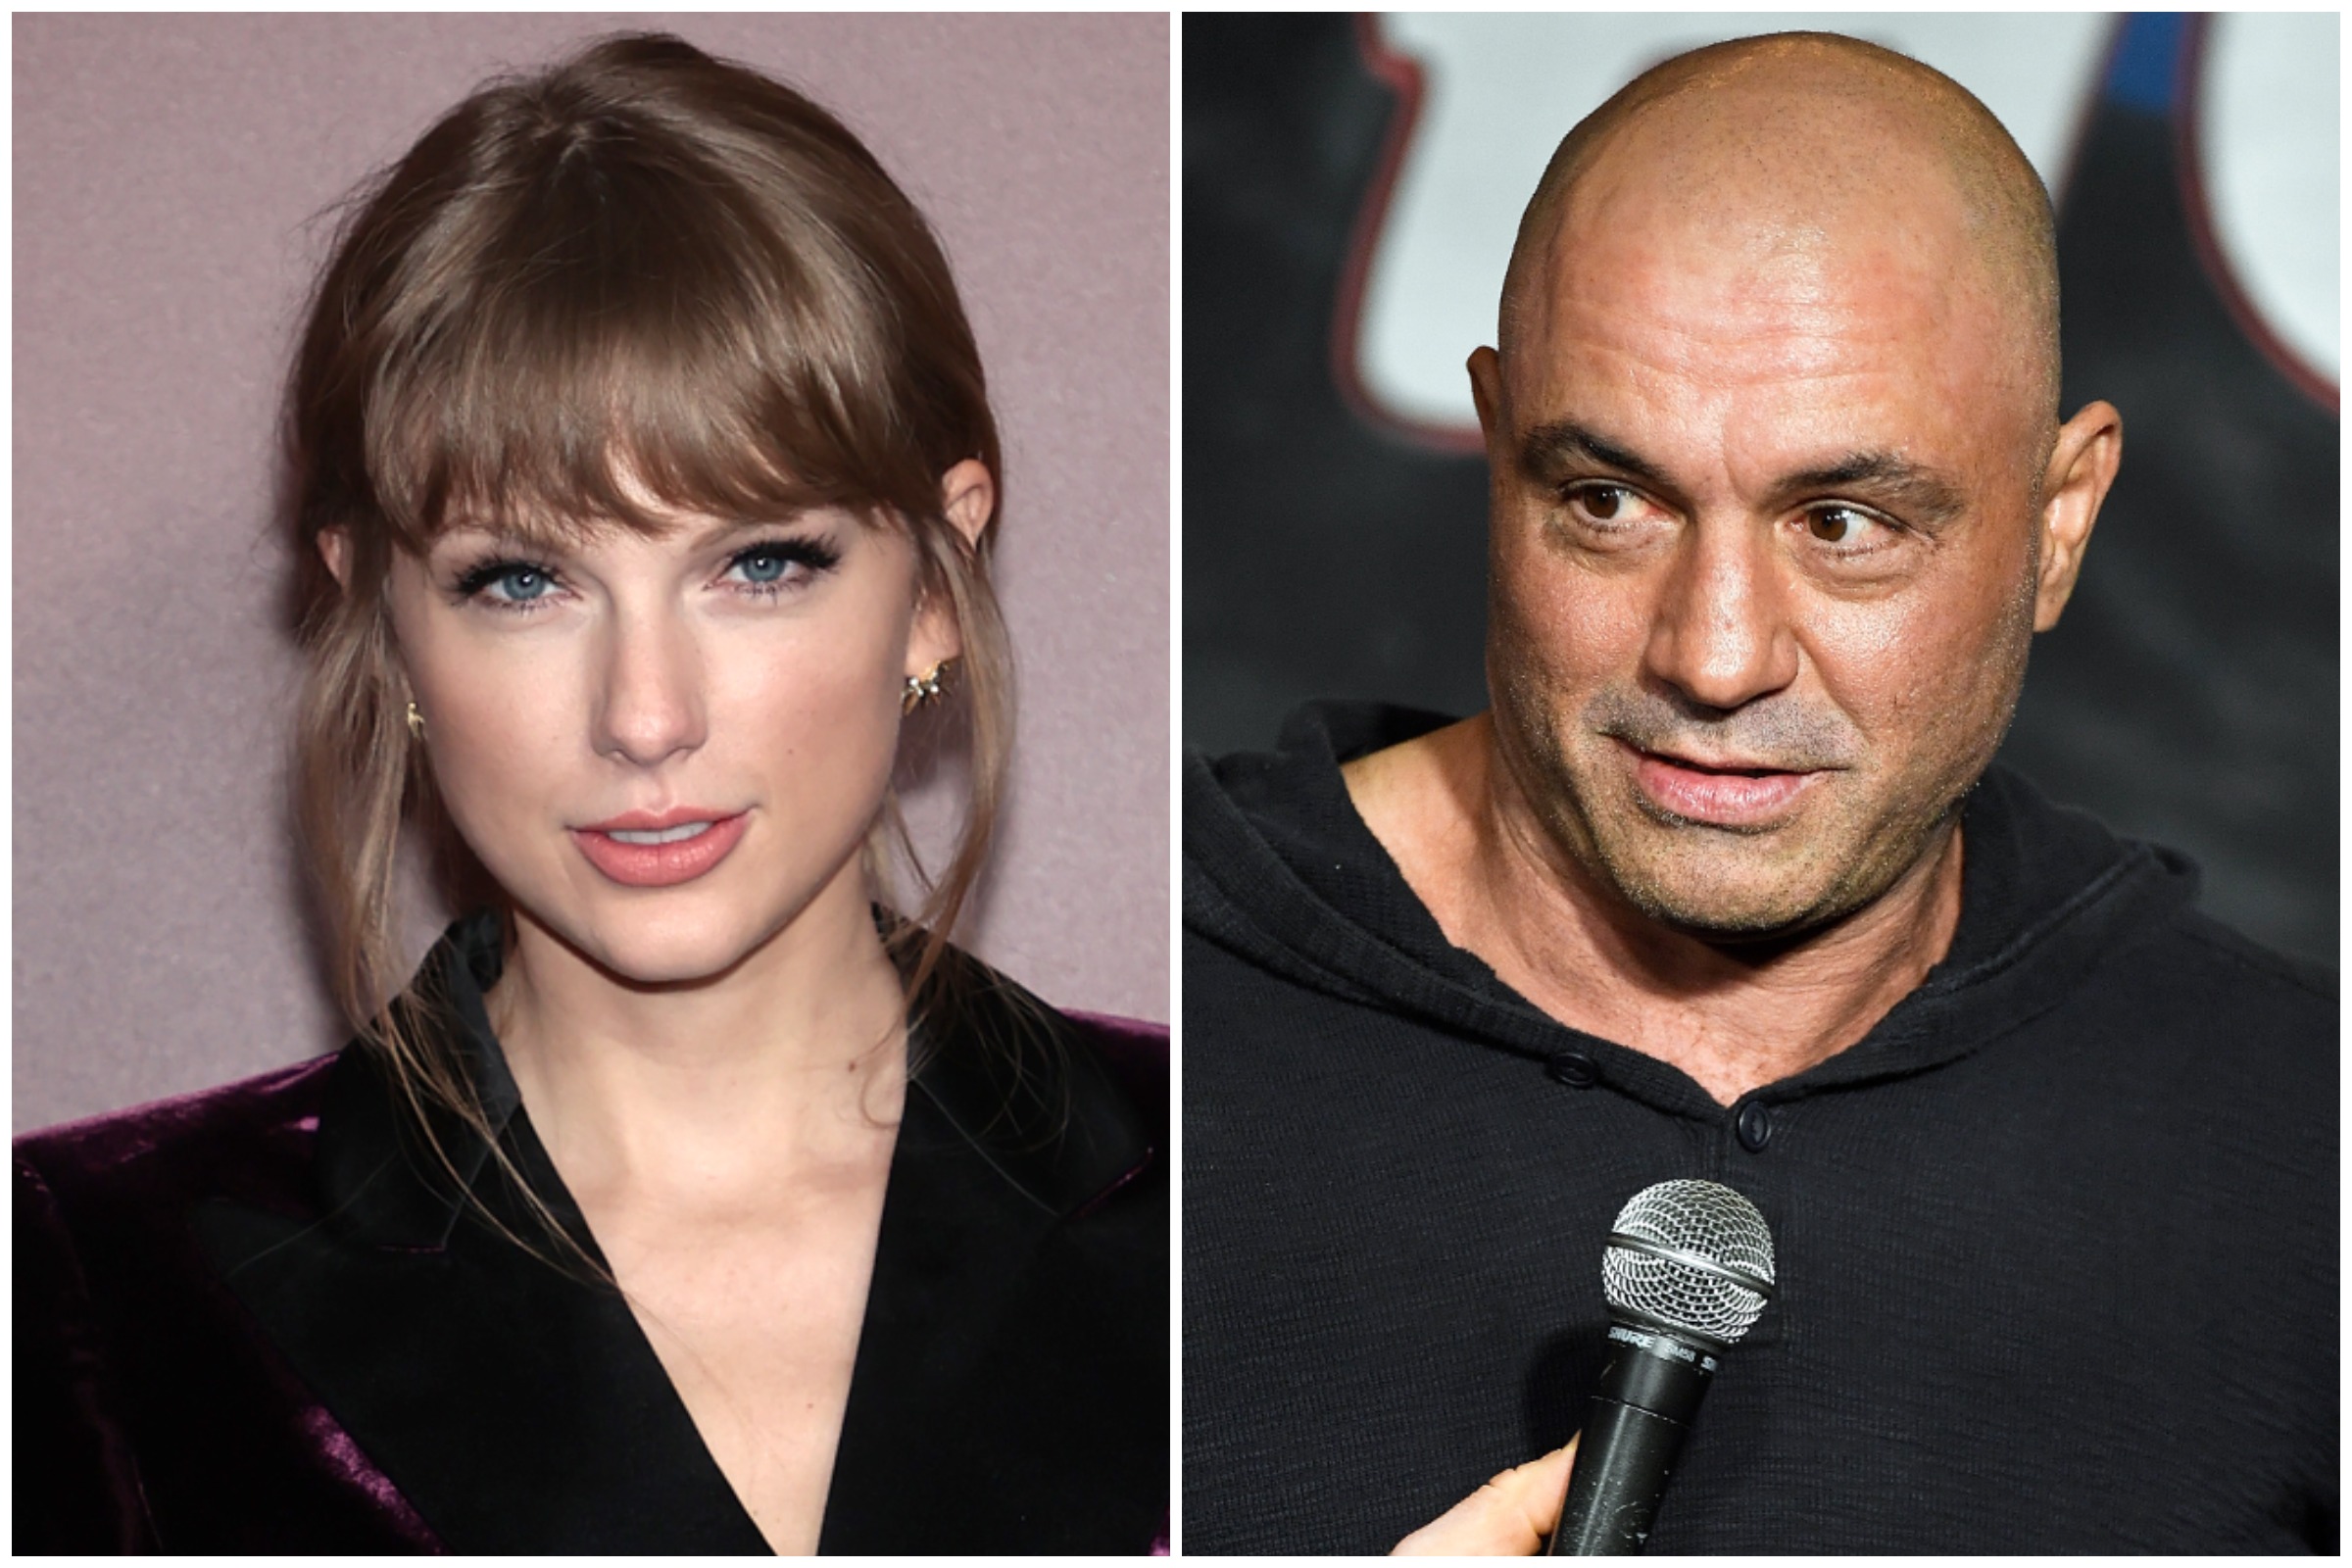 Taylor Swift Fans Call on Her to Pull Music From Spotify Over Joe Rogan